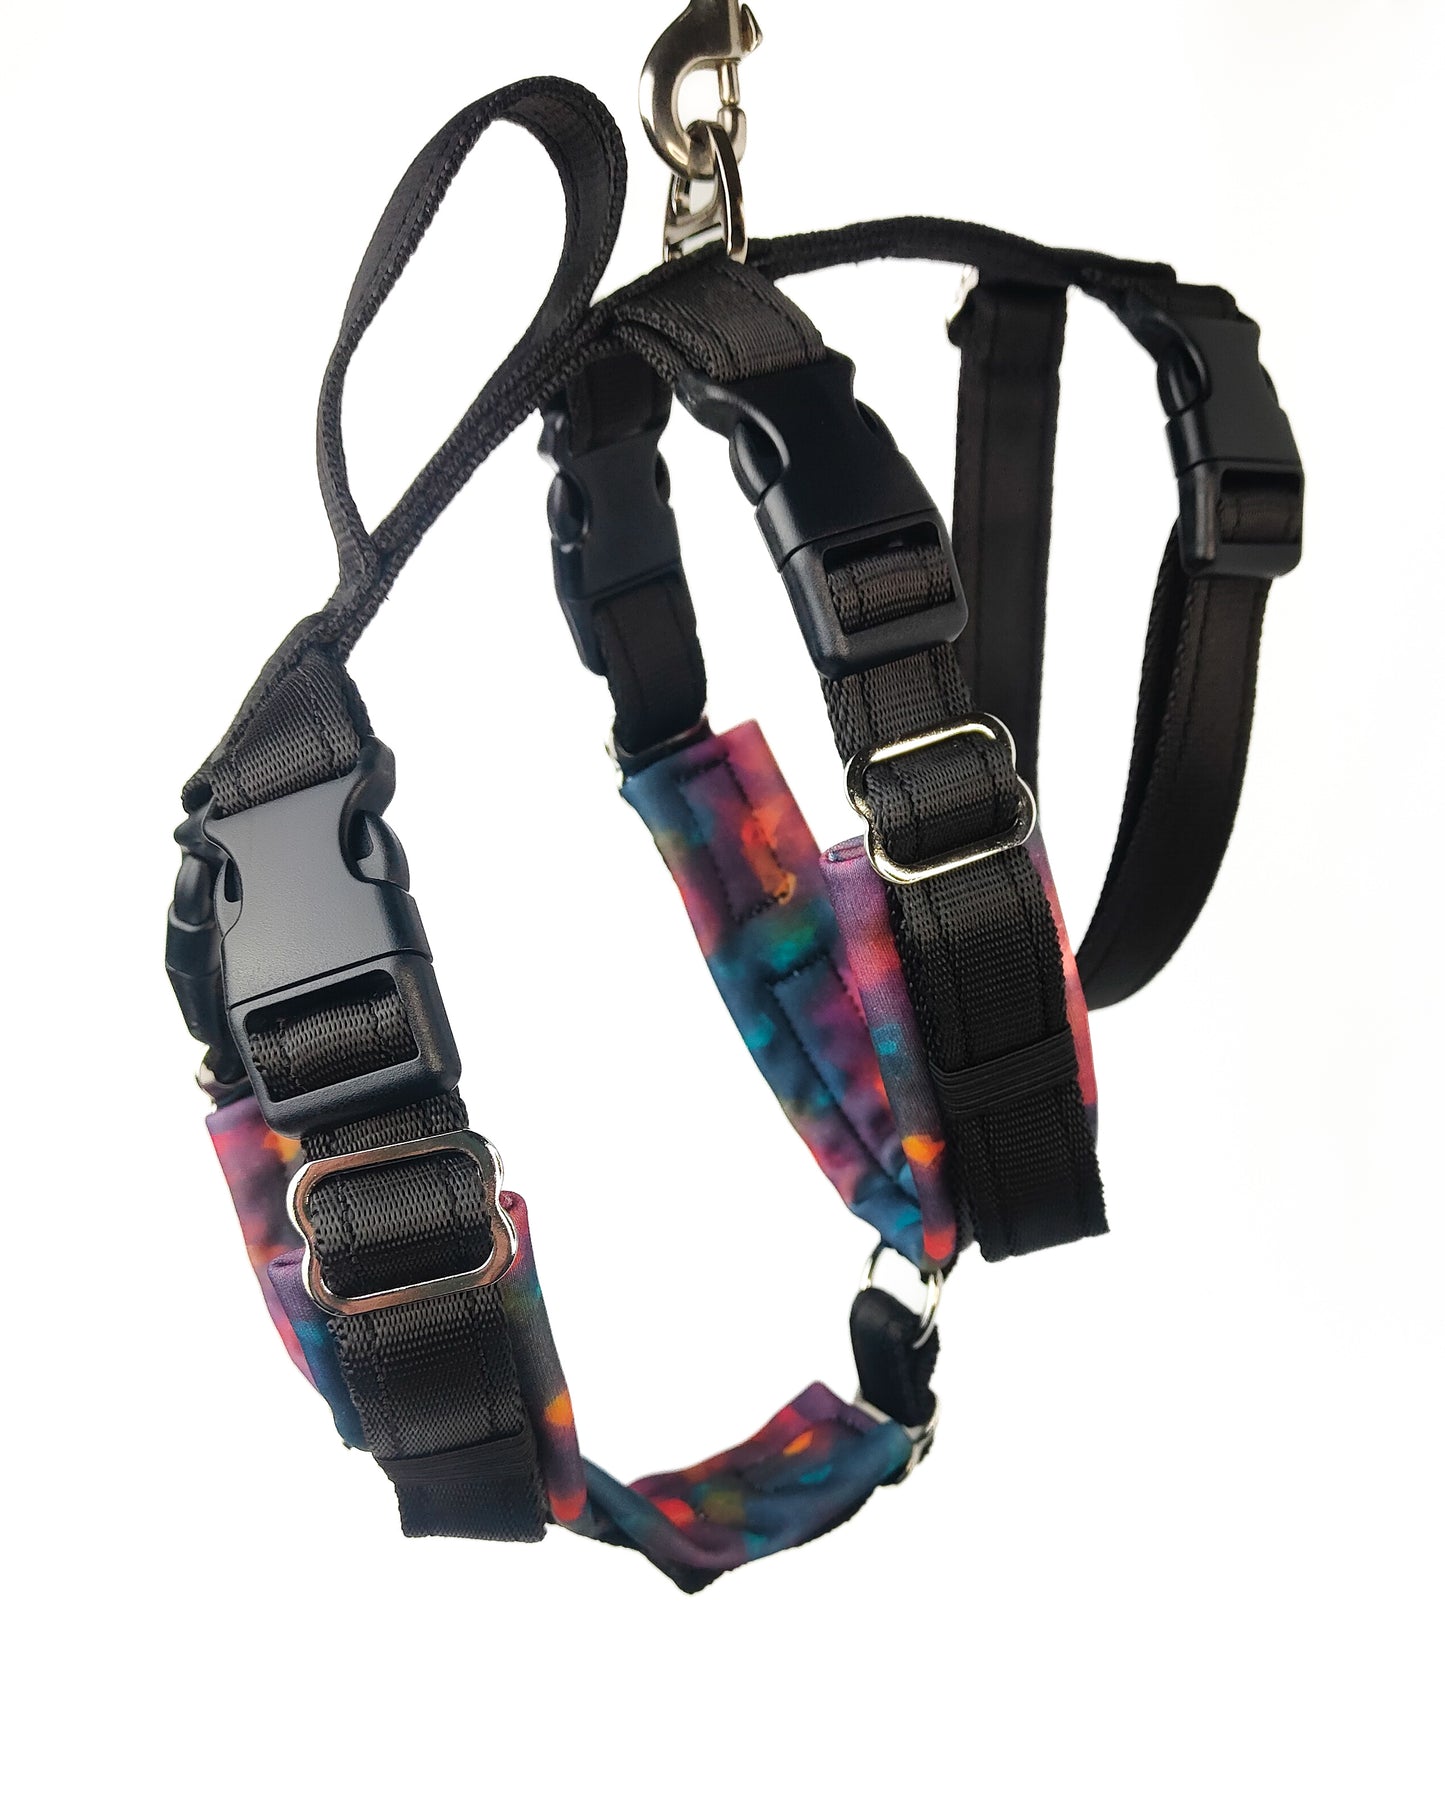 Escape Proof Adjustable Houdini Harness - Softshell Lined